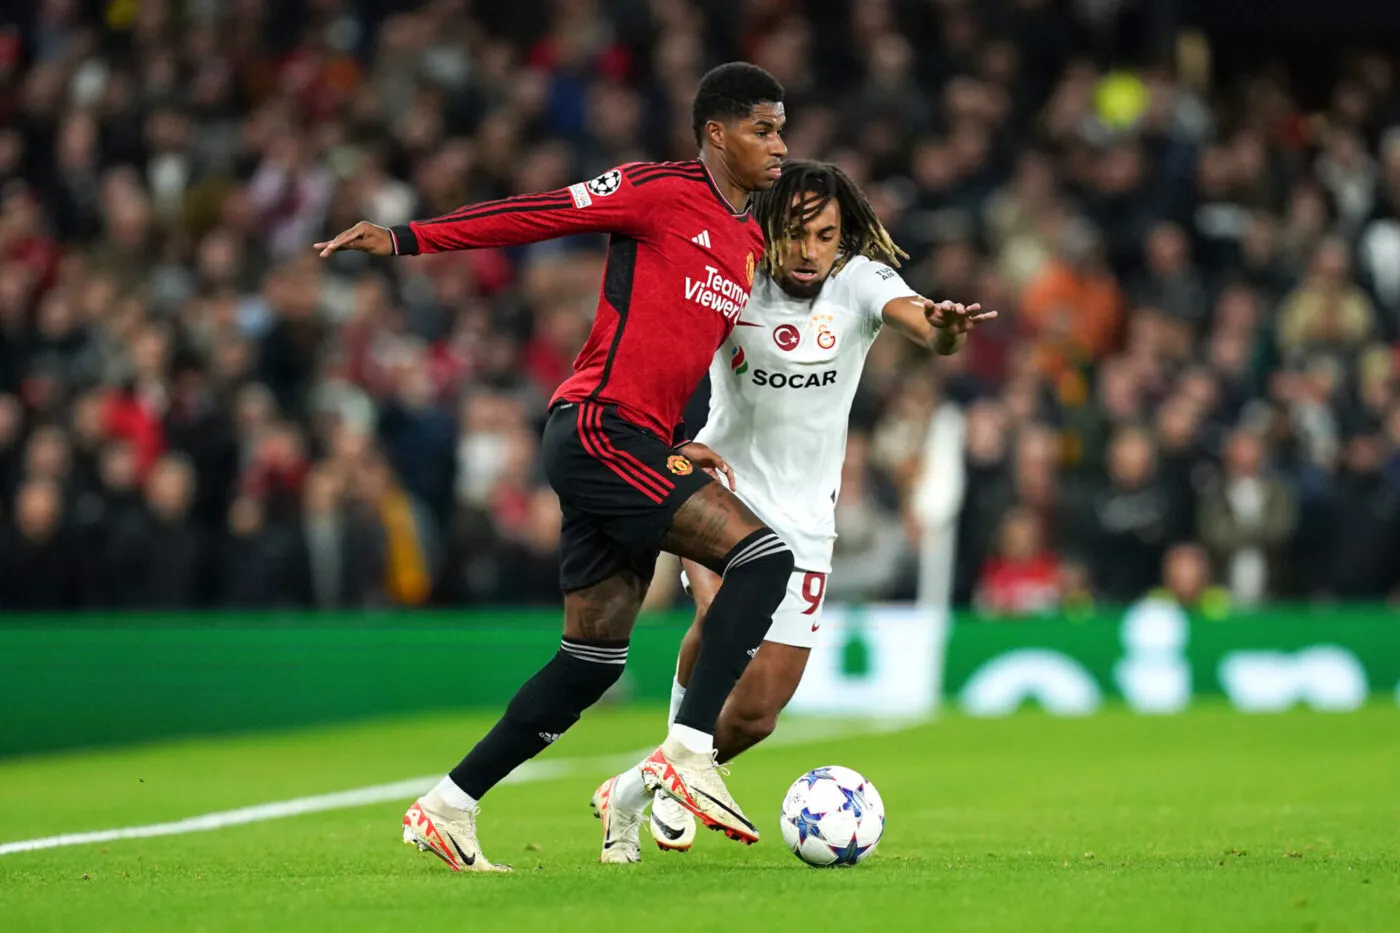 Manchester United's Marcus Rashford (left) and Galatasaray's Sacha Boey battle for the ball during the UEFA Champions League Group A match at Old Trafford, Manchester. Picture date: Tuesday October 3, 2023. - Photo by Icon sport